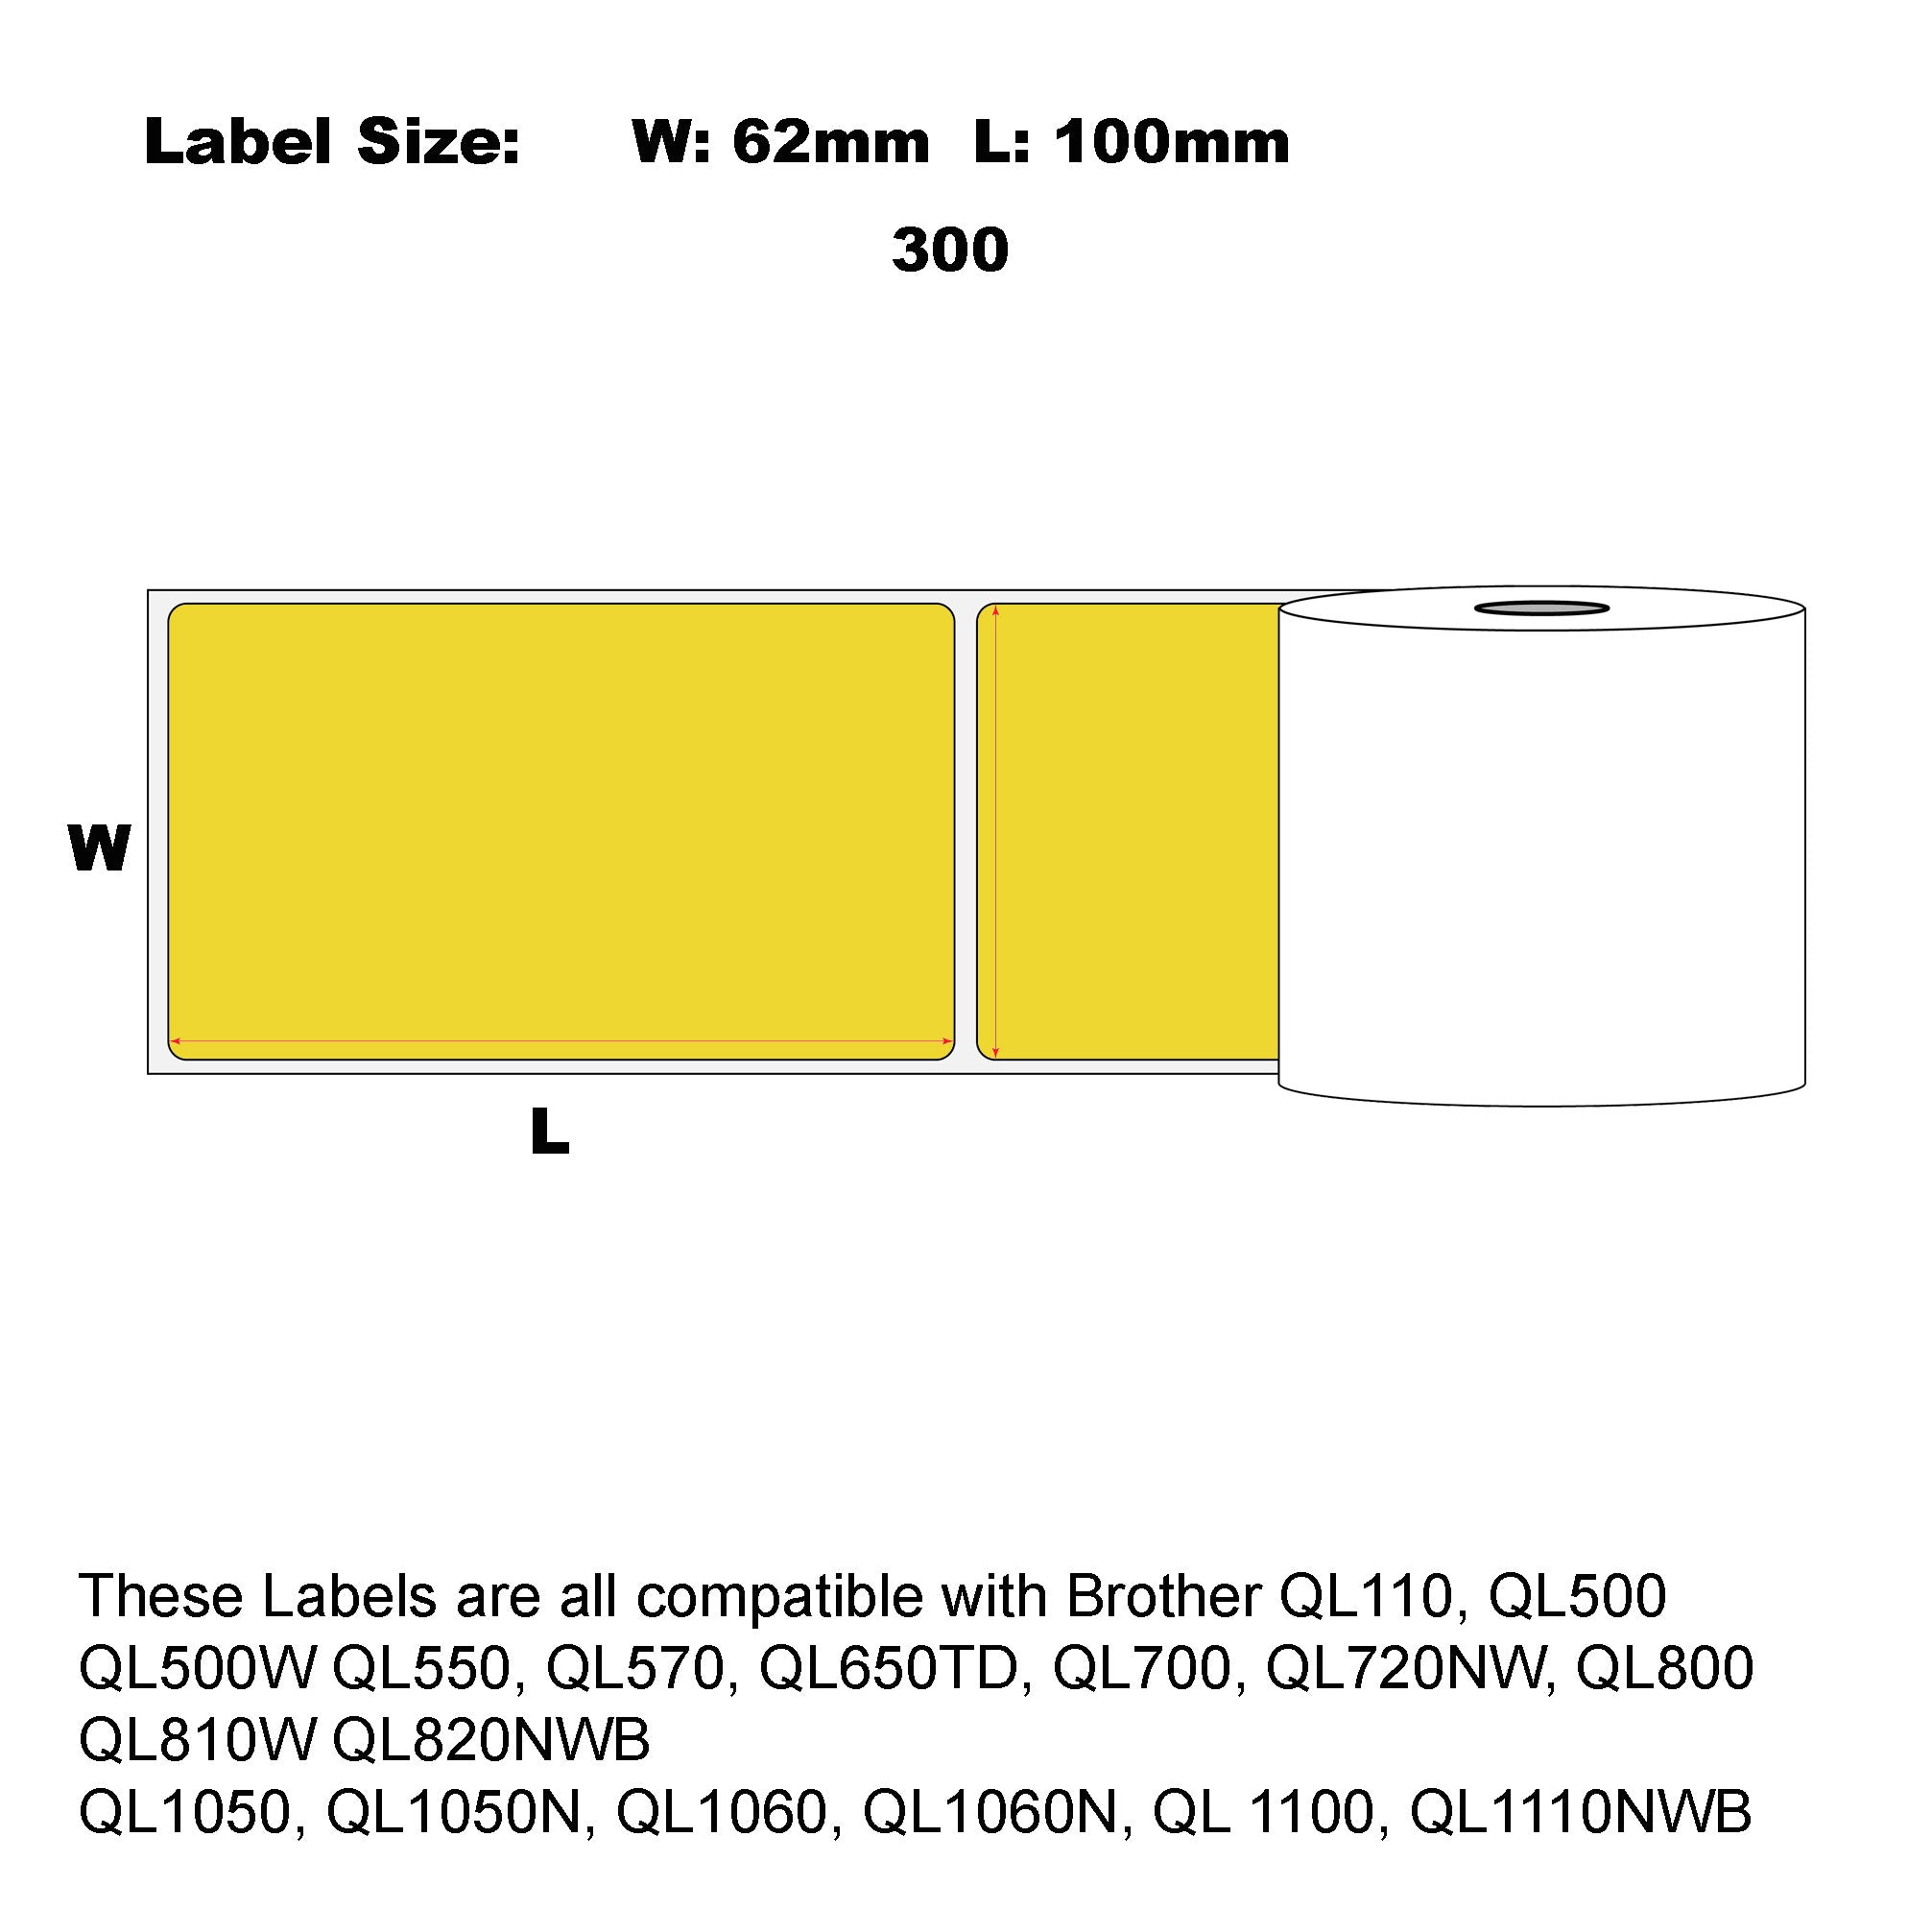 24x Compatible Brother DK-11202 Yellow Refill Labels 62mm x 100mm 300 Labels Per Roll